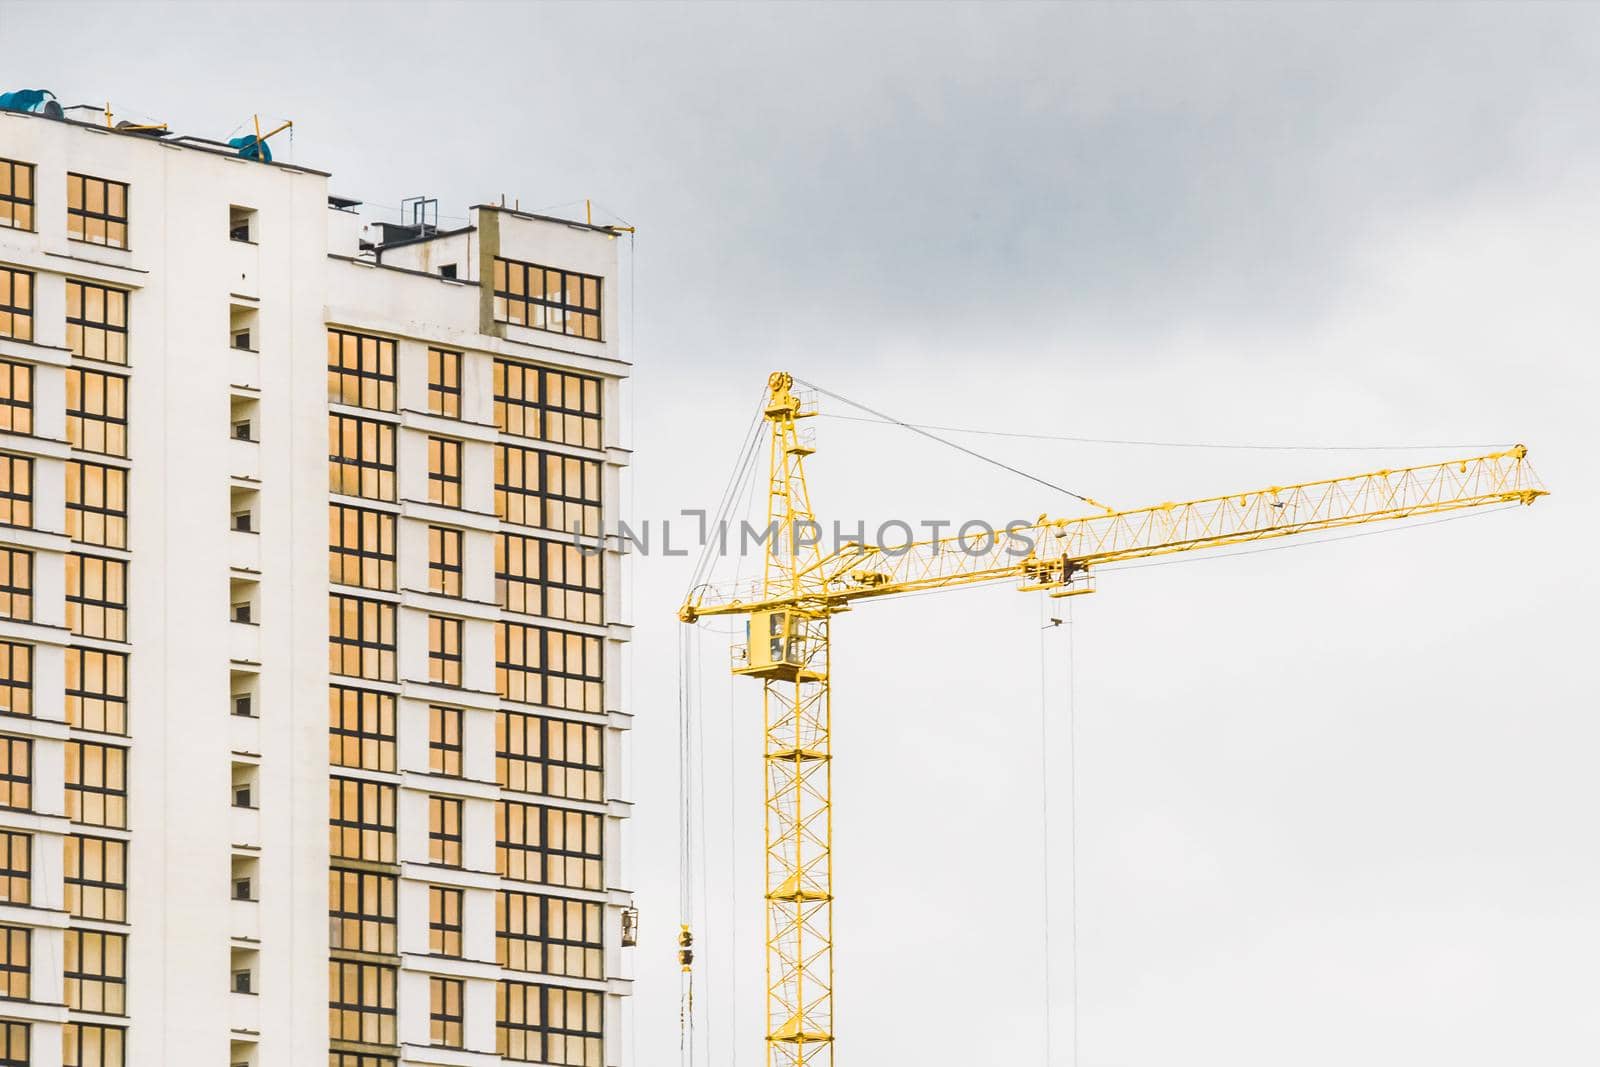 Industrial tower crane build a new modern city building on an construction site. Building development and work of urban architecture by AYDO8